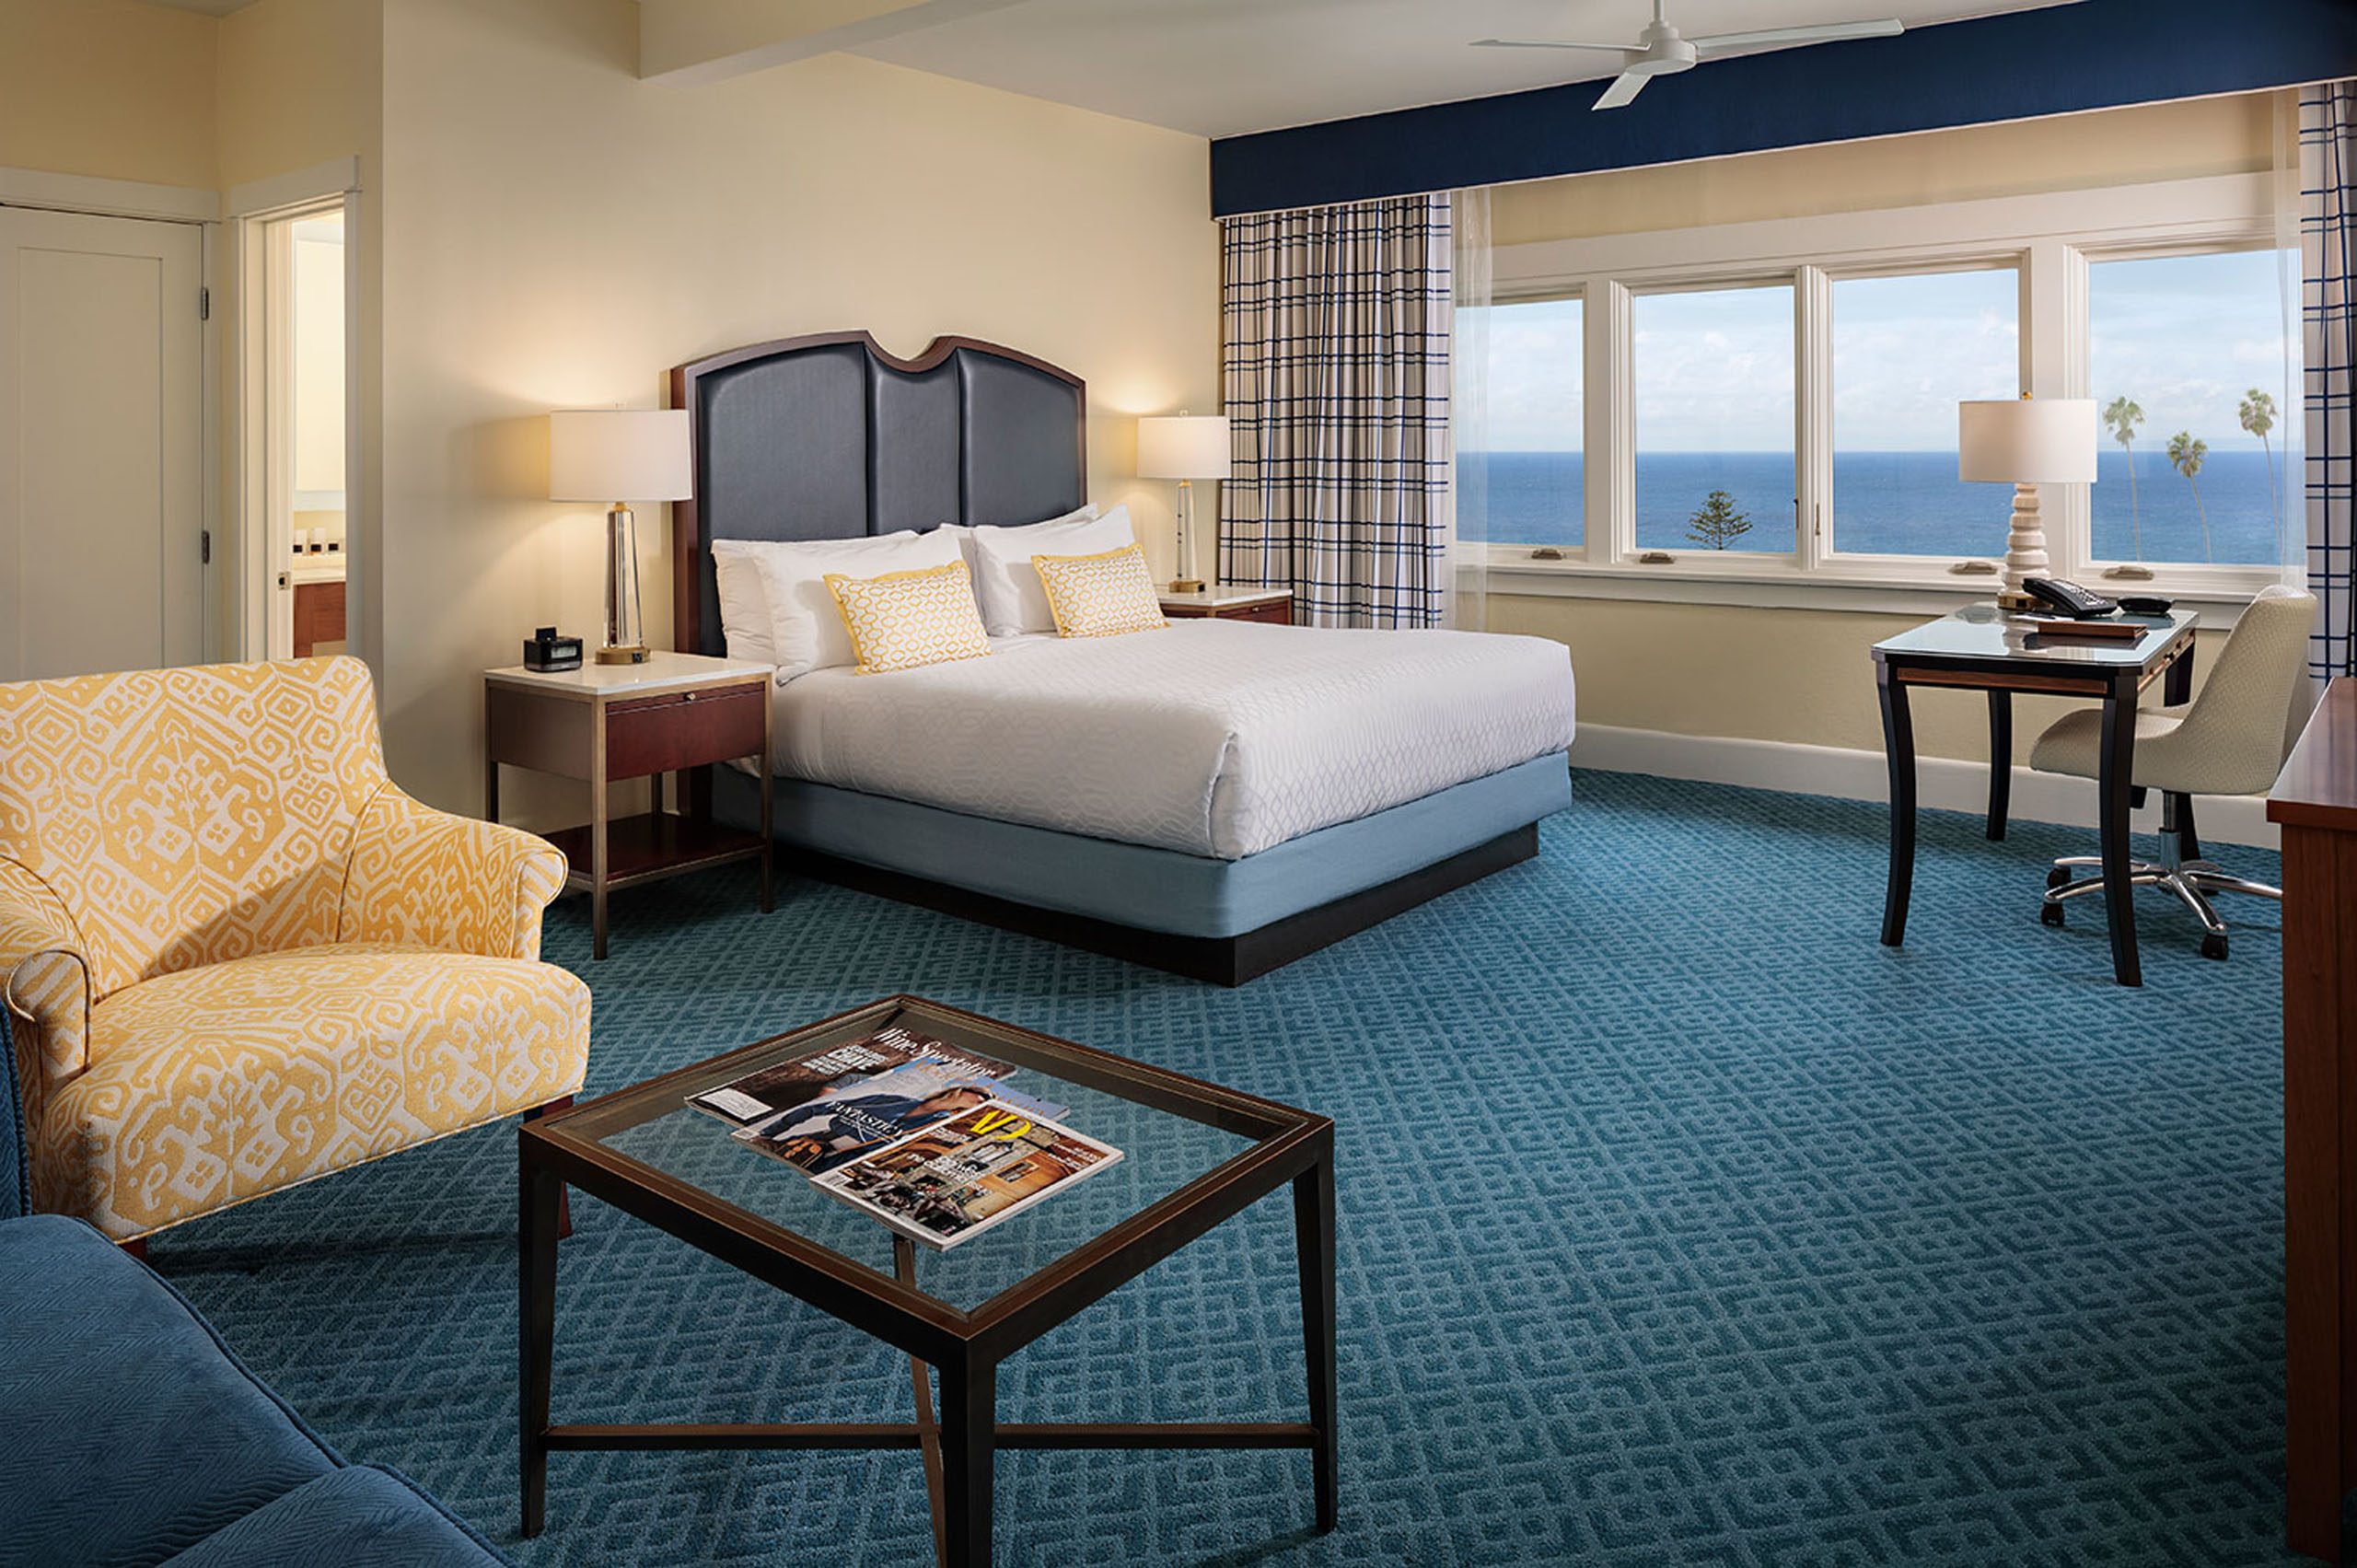 grande-ocean-view-king-junior-suite - An ocean-view king sized hotel room with a bed, desk with chair, sitting chair, couch and coffee table.